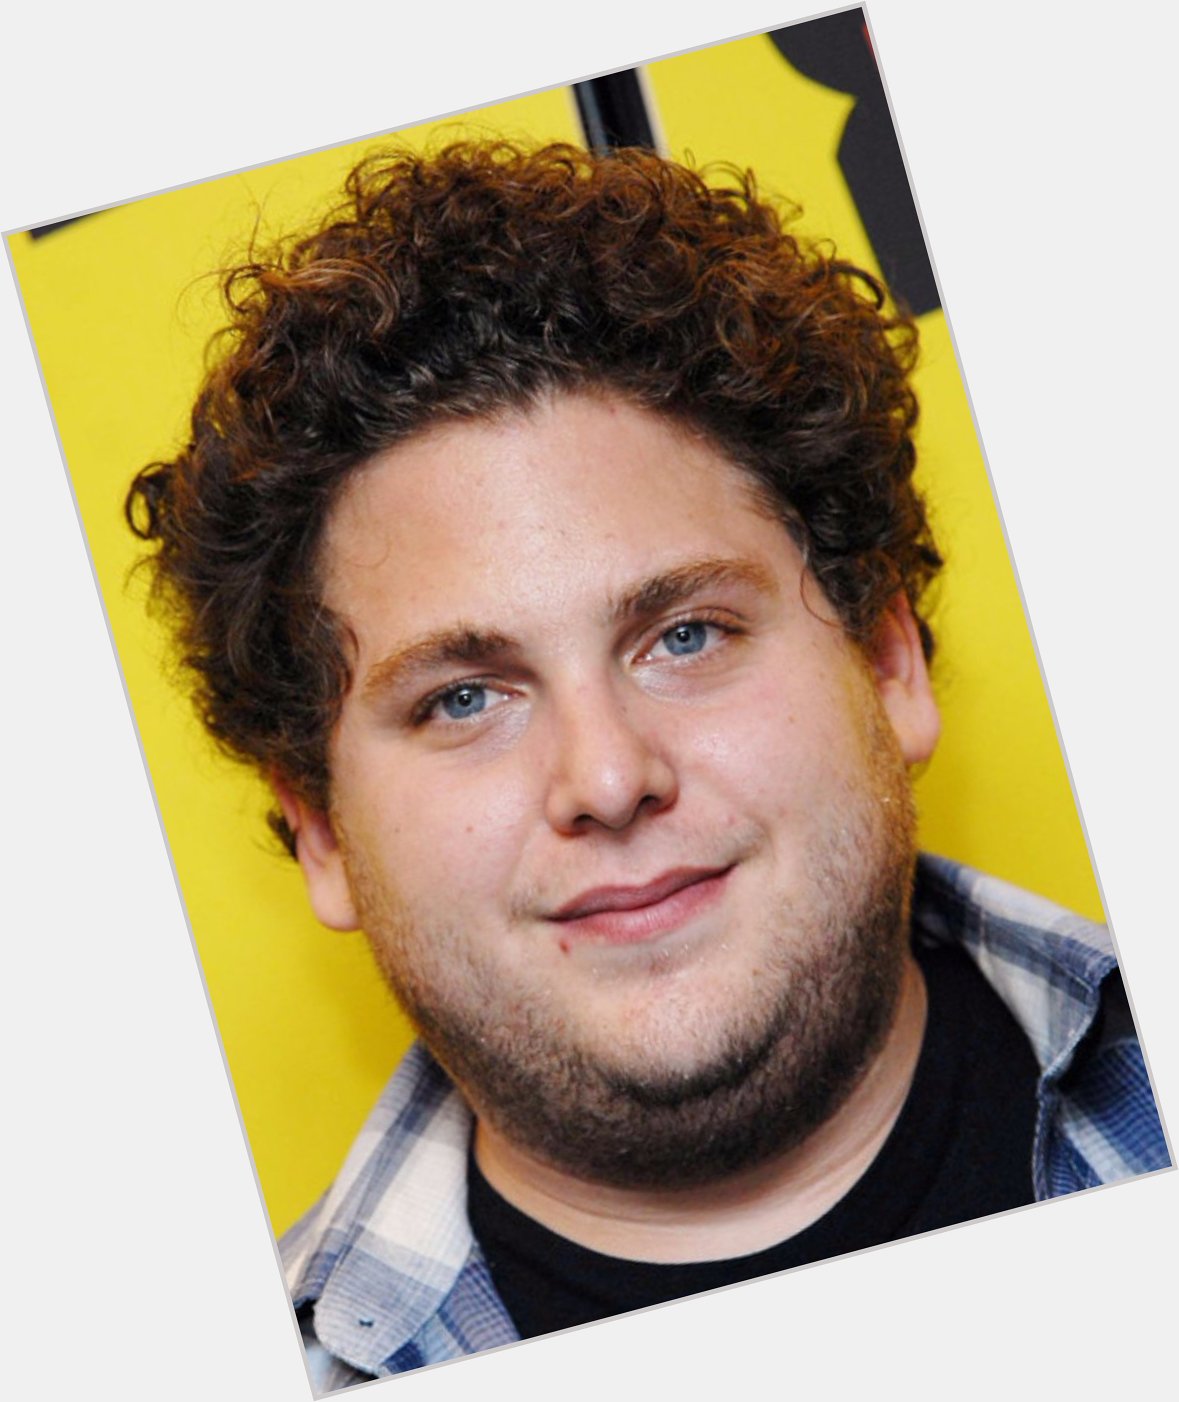 Happy birthday ! dont have a pic with you but it\s also Jonah Hill\s birthday so here\s one of him  